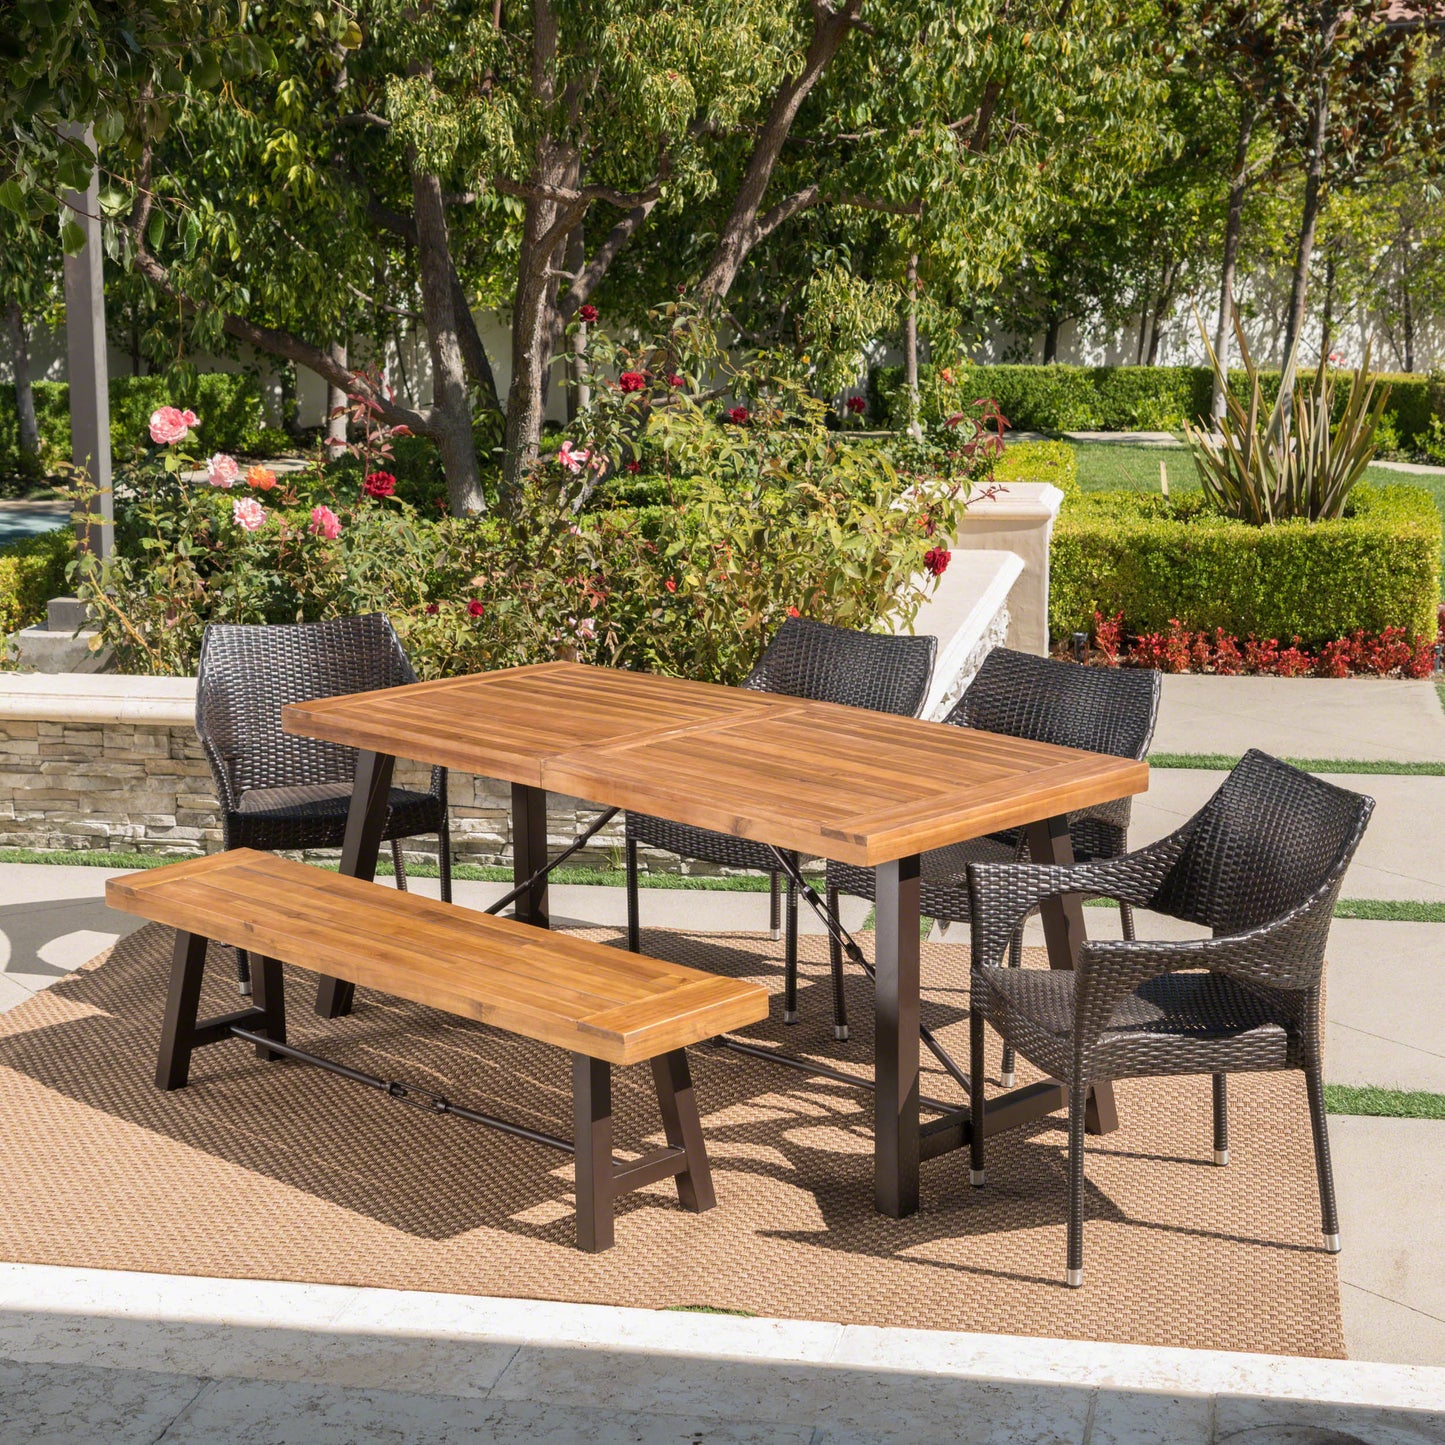 Montenegro Outdoor 6 Piece Teak Finished Acacia Wood Dining Set with Stacking Chairs